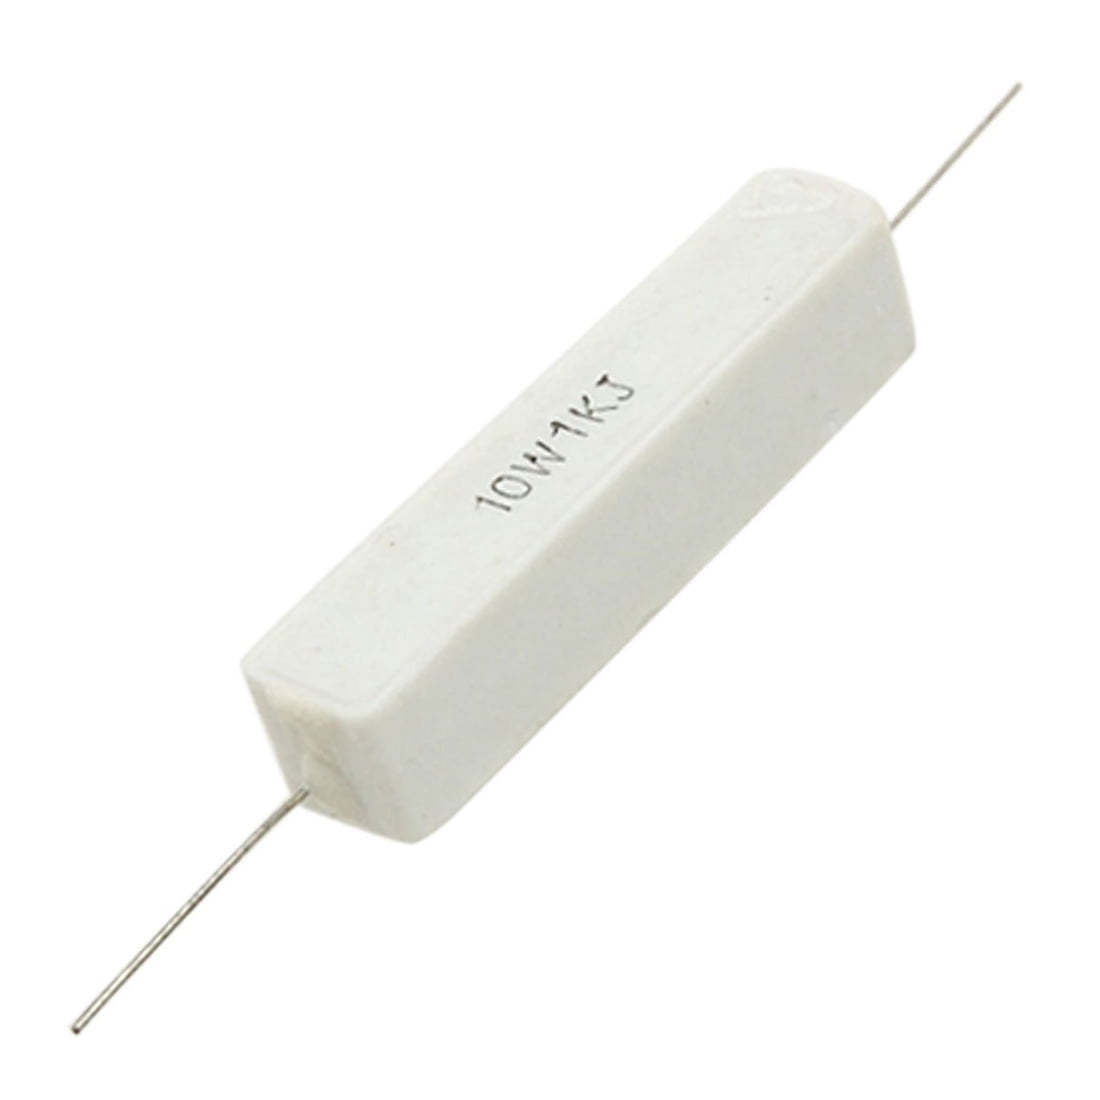 uxcell 10W 1k Ohm Power Resistor Ceramic Cement Resistor Axial Lead 10 Pcs White 